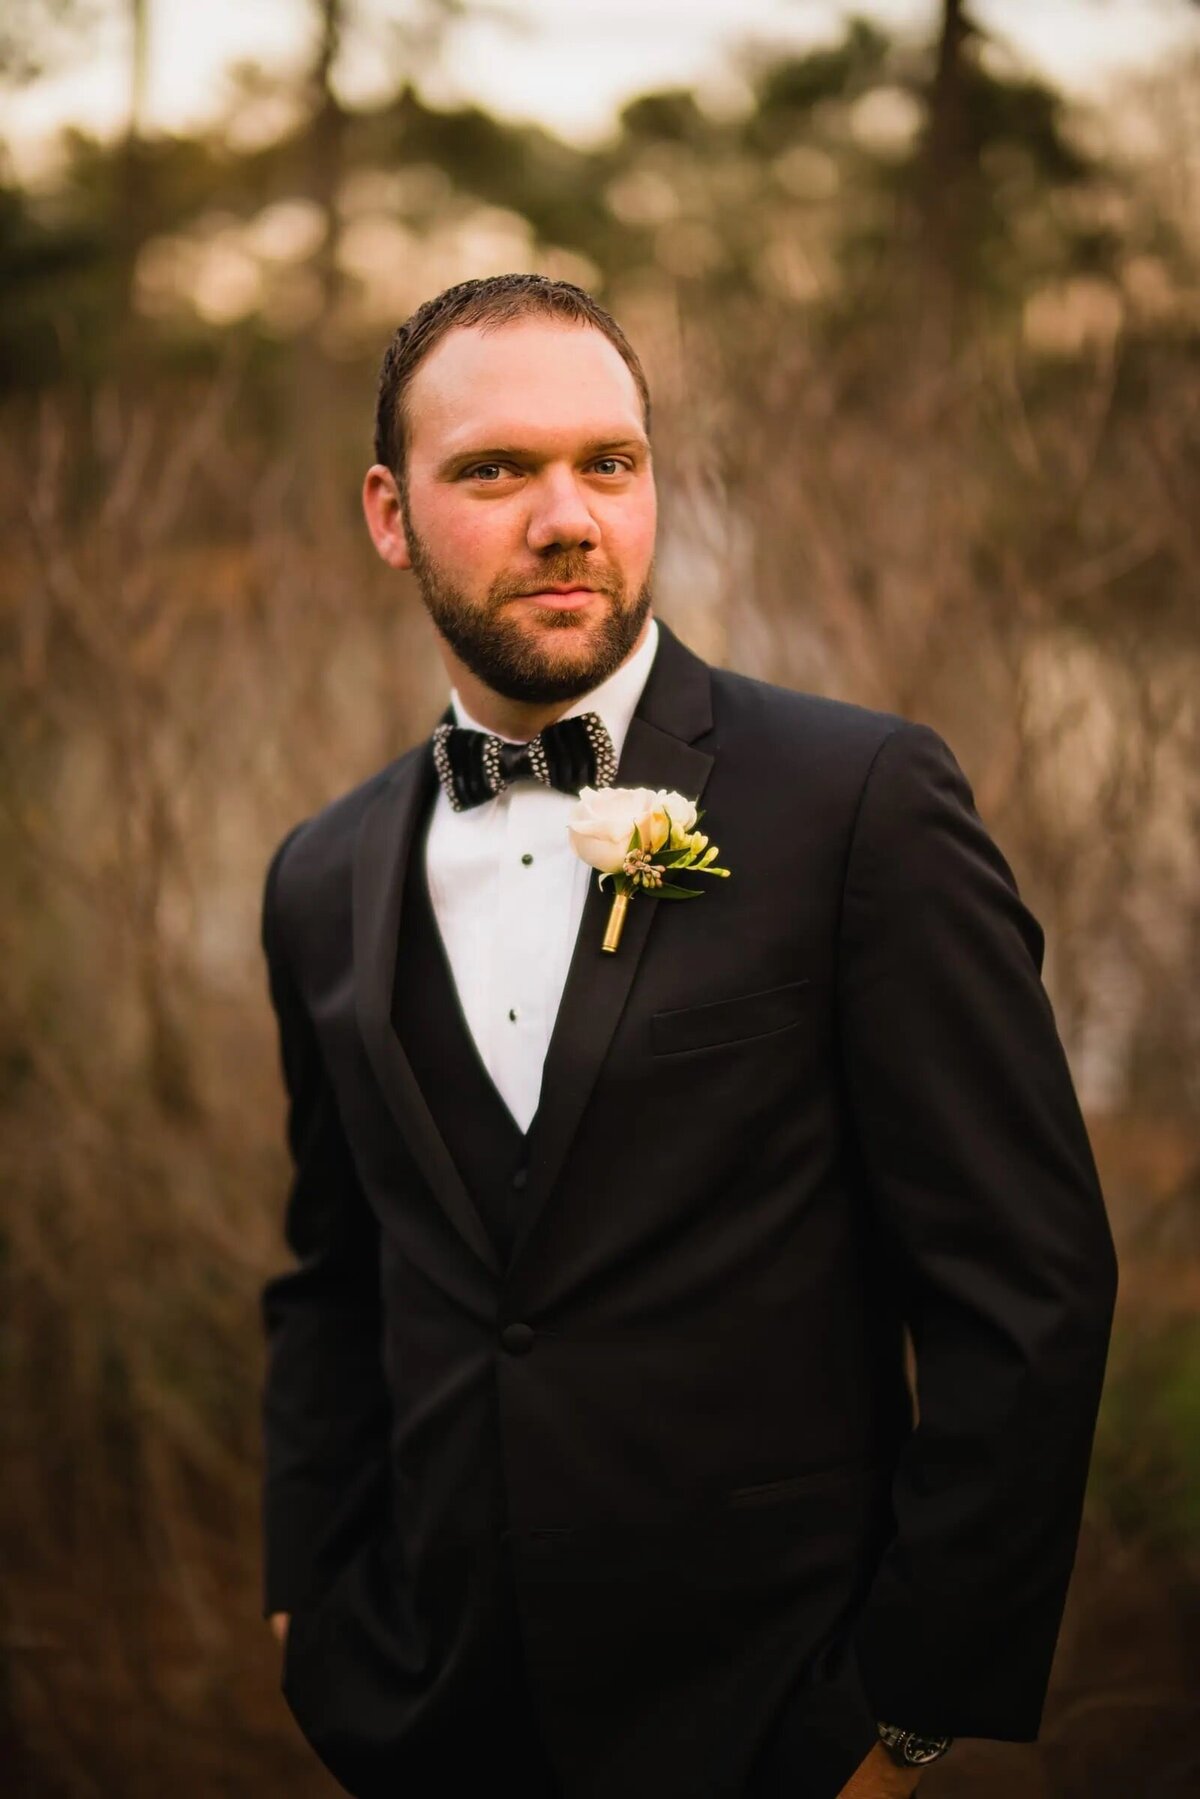 A groom in a black tuxedo with a bow tie stands confidently outdoors